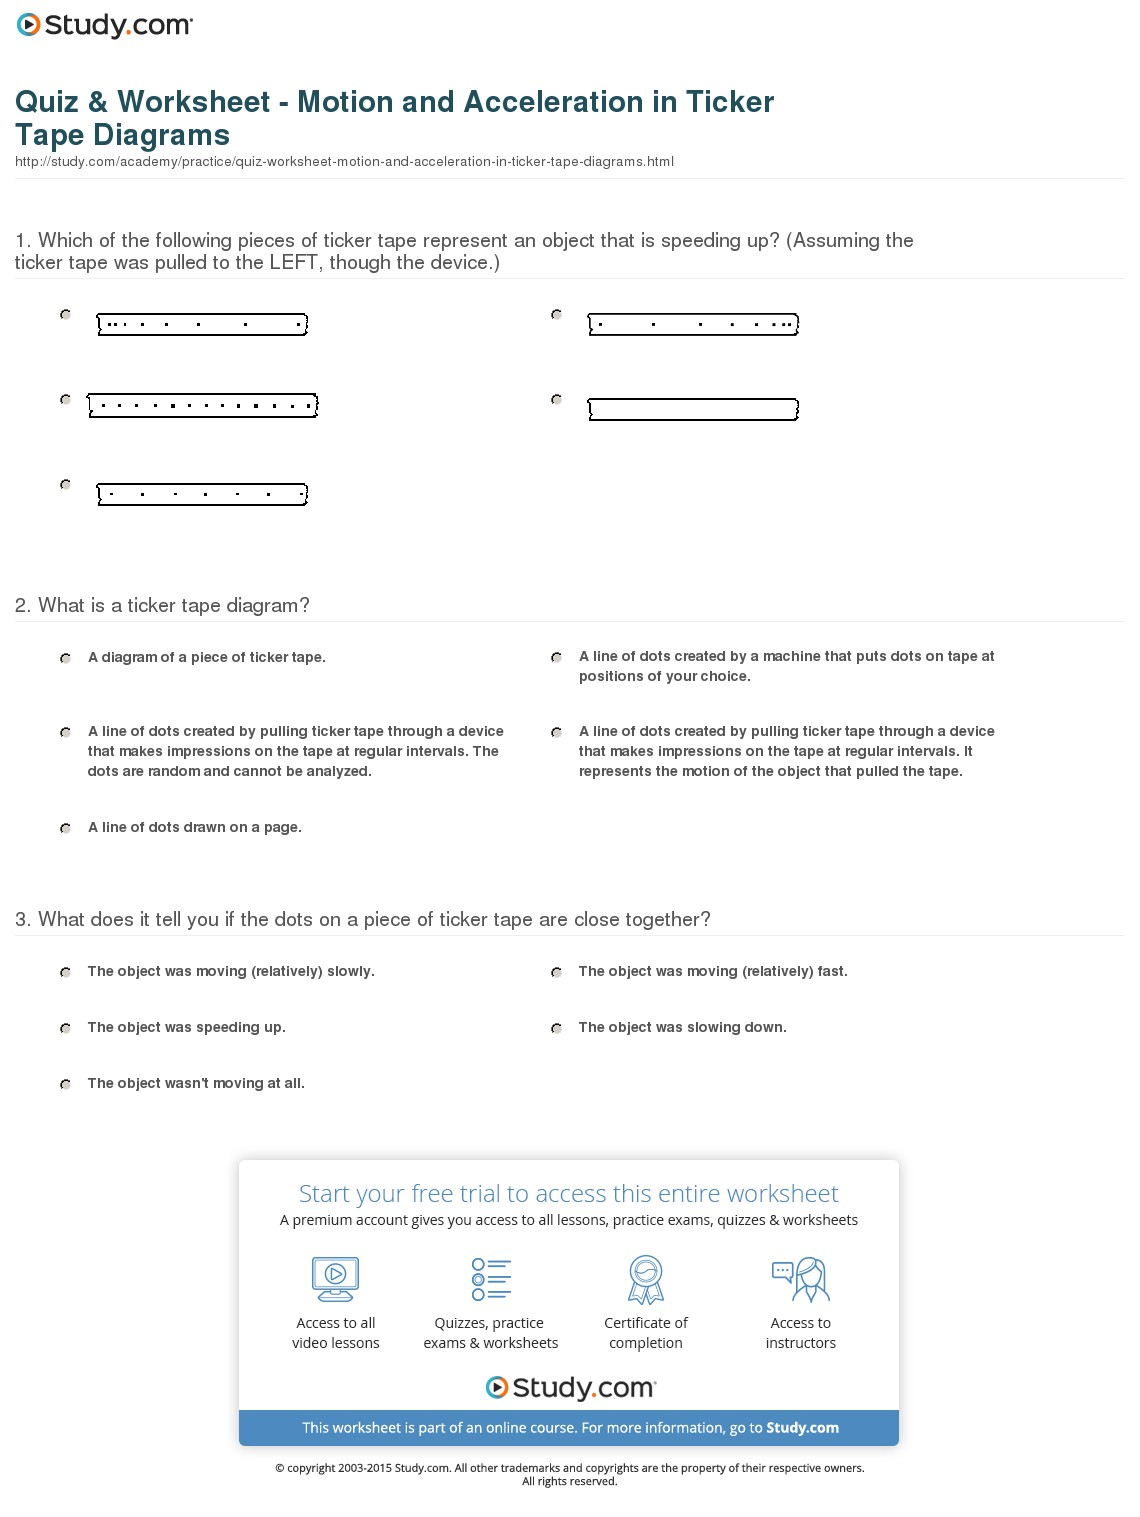 What Is A Tape Diagram Quiz Worksheet Motion And Acceleration In Ticker Tape Diagrams